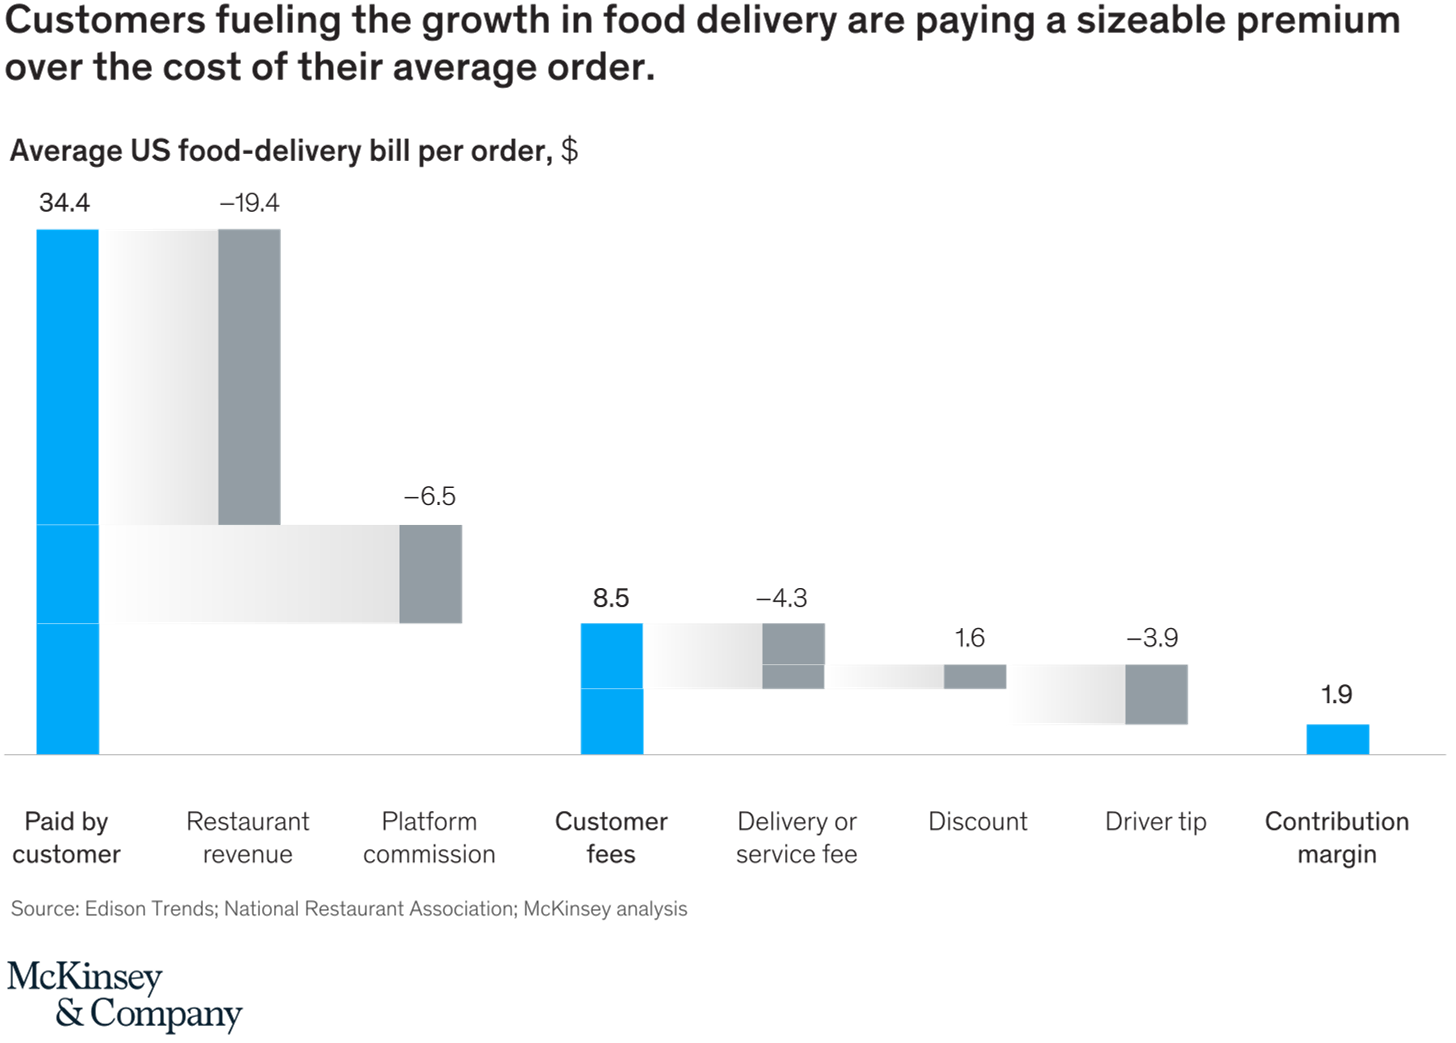 Customers fueling the growth in food delivery are paying a sizeable premium over the cost of their average order.